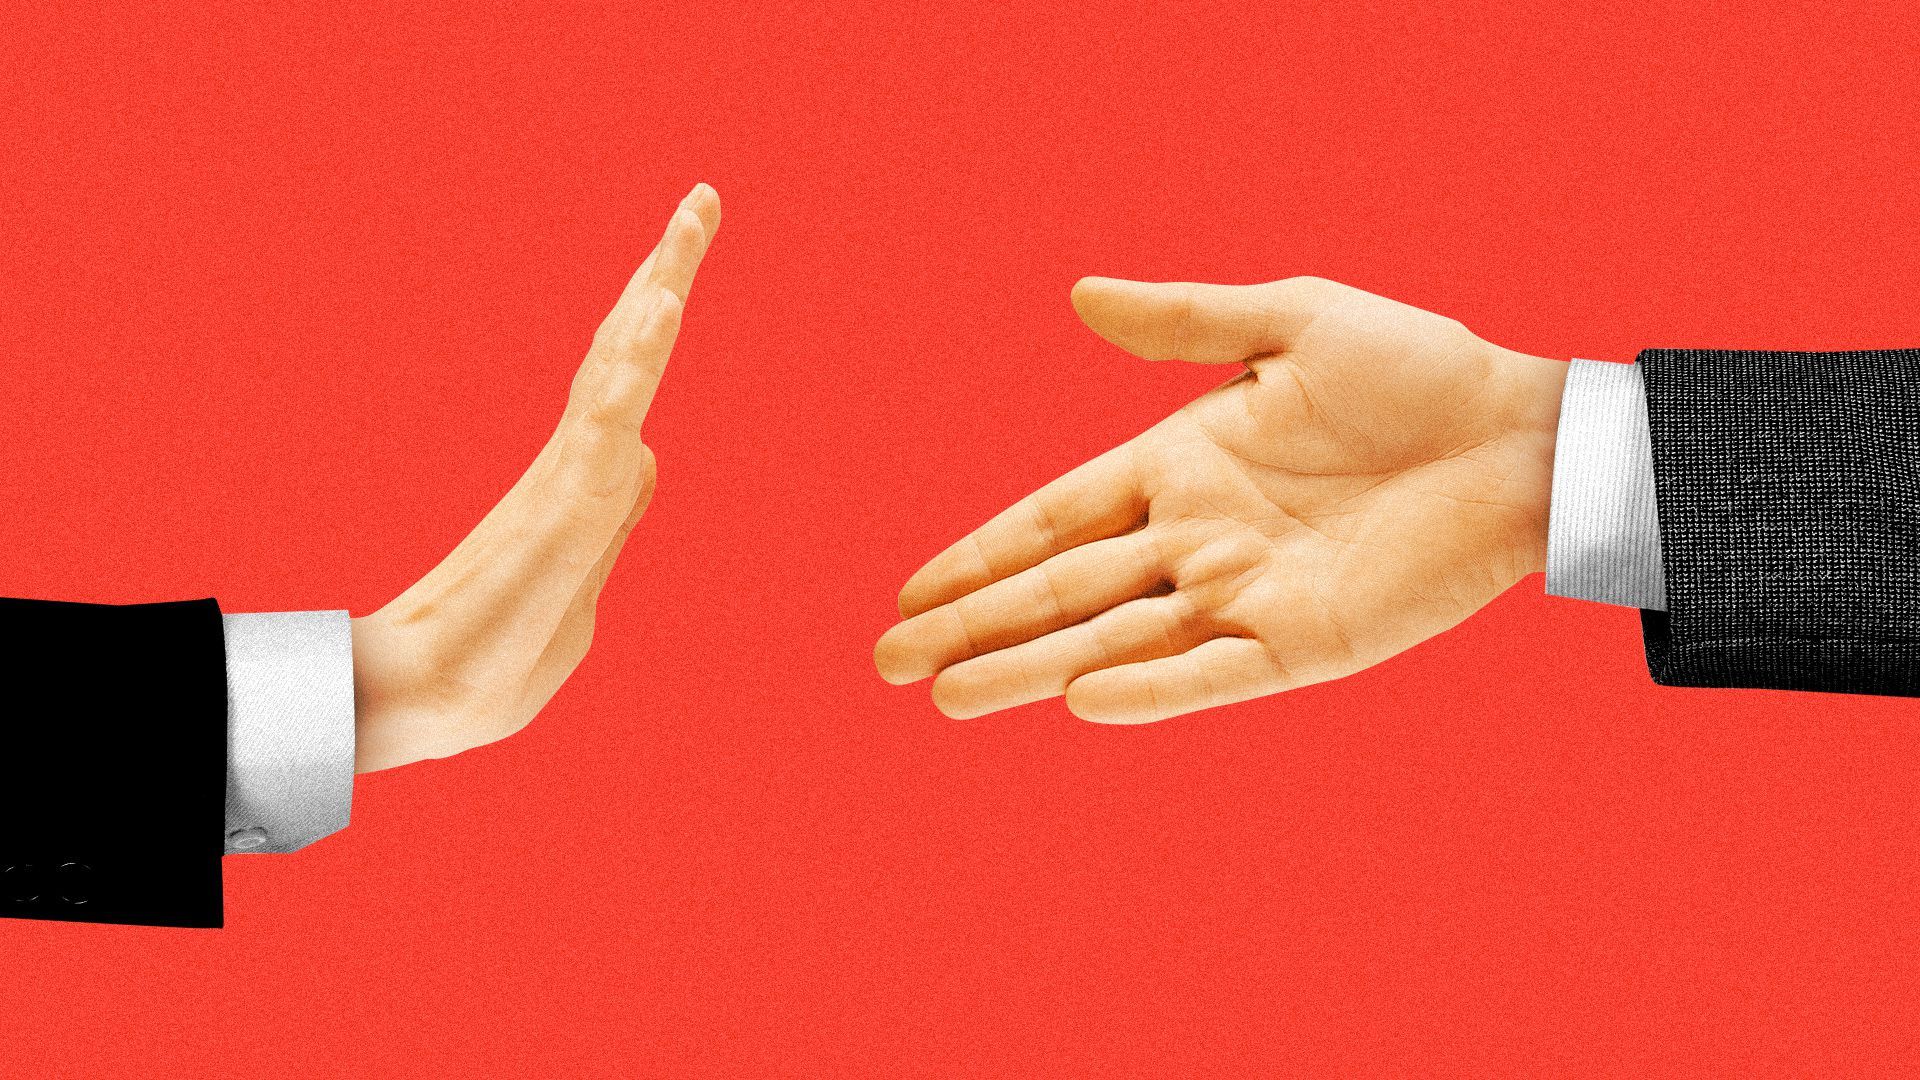 Illustration of a hand reaching out for a hand shake with another hand making a stop gesture. 